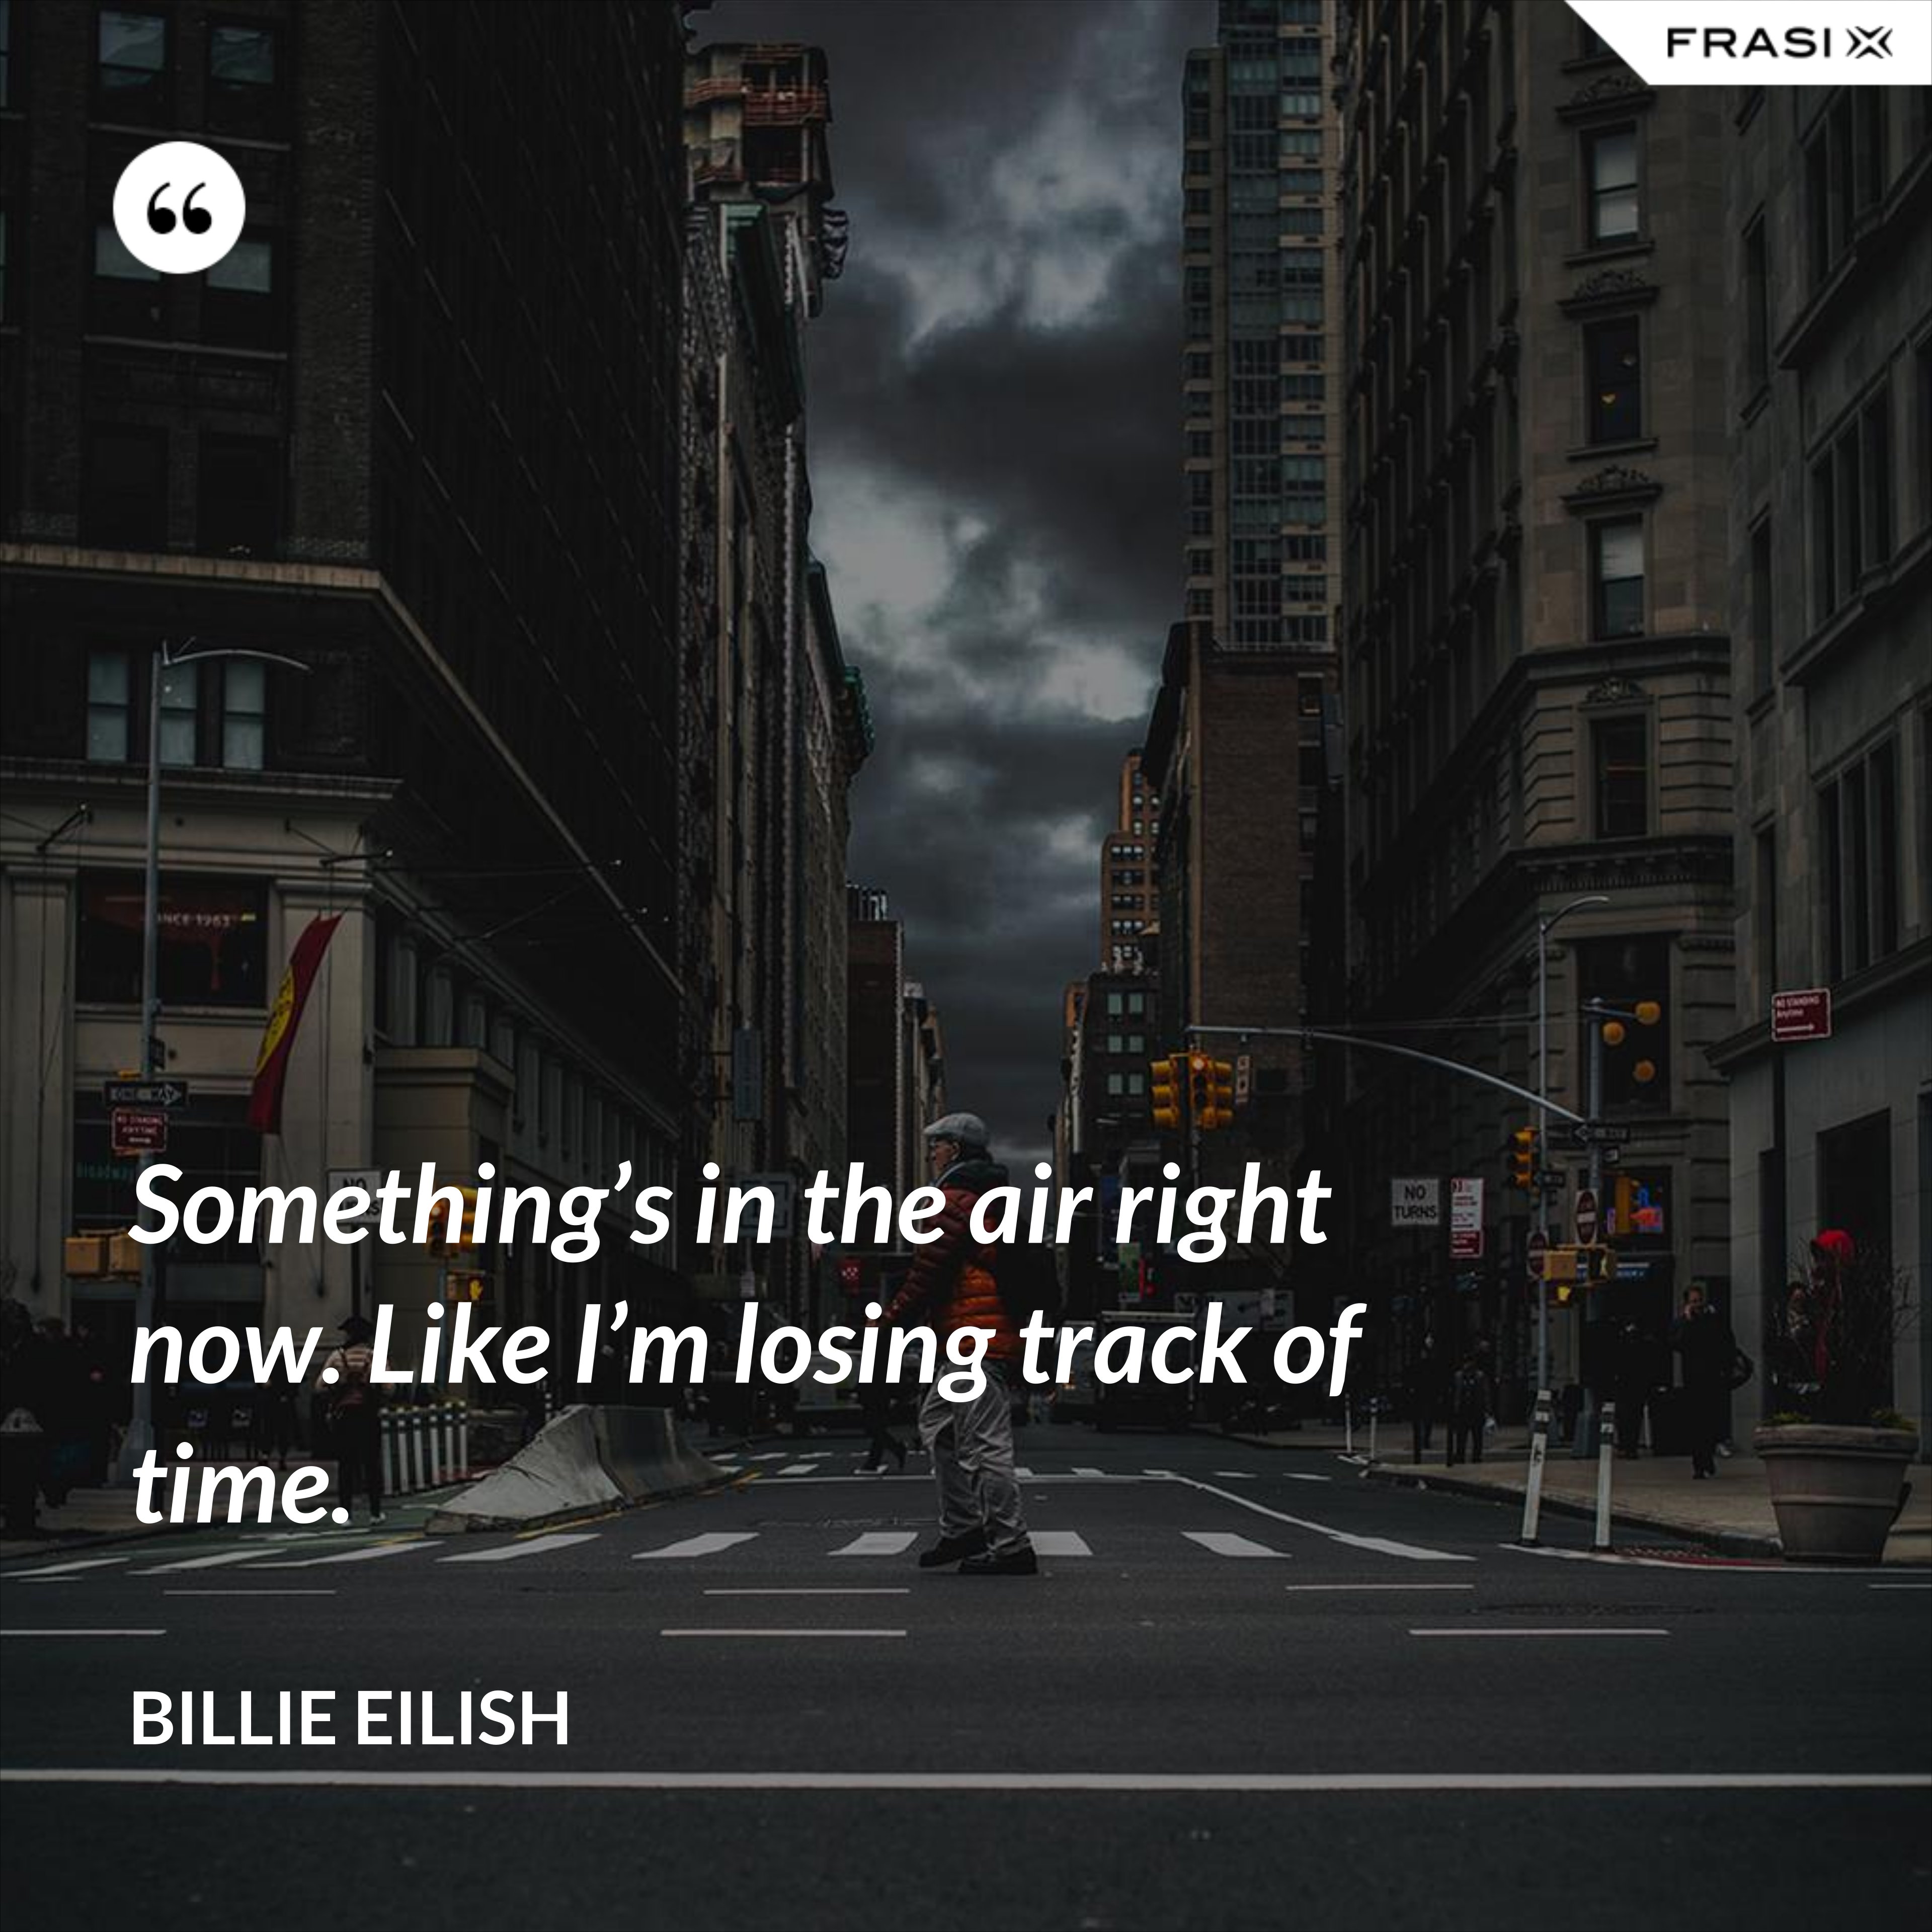 Something’s in the air right now. Like I’m losing track of time. - Billie Eilish